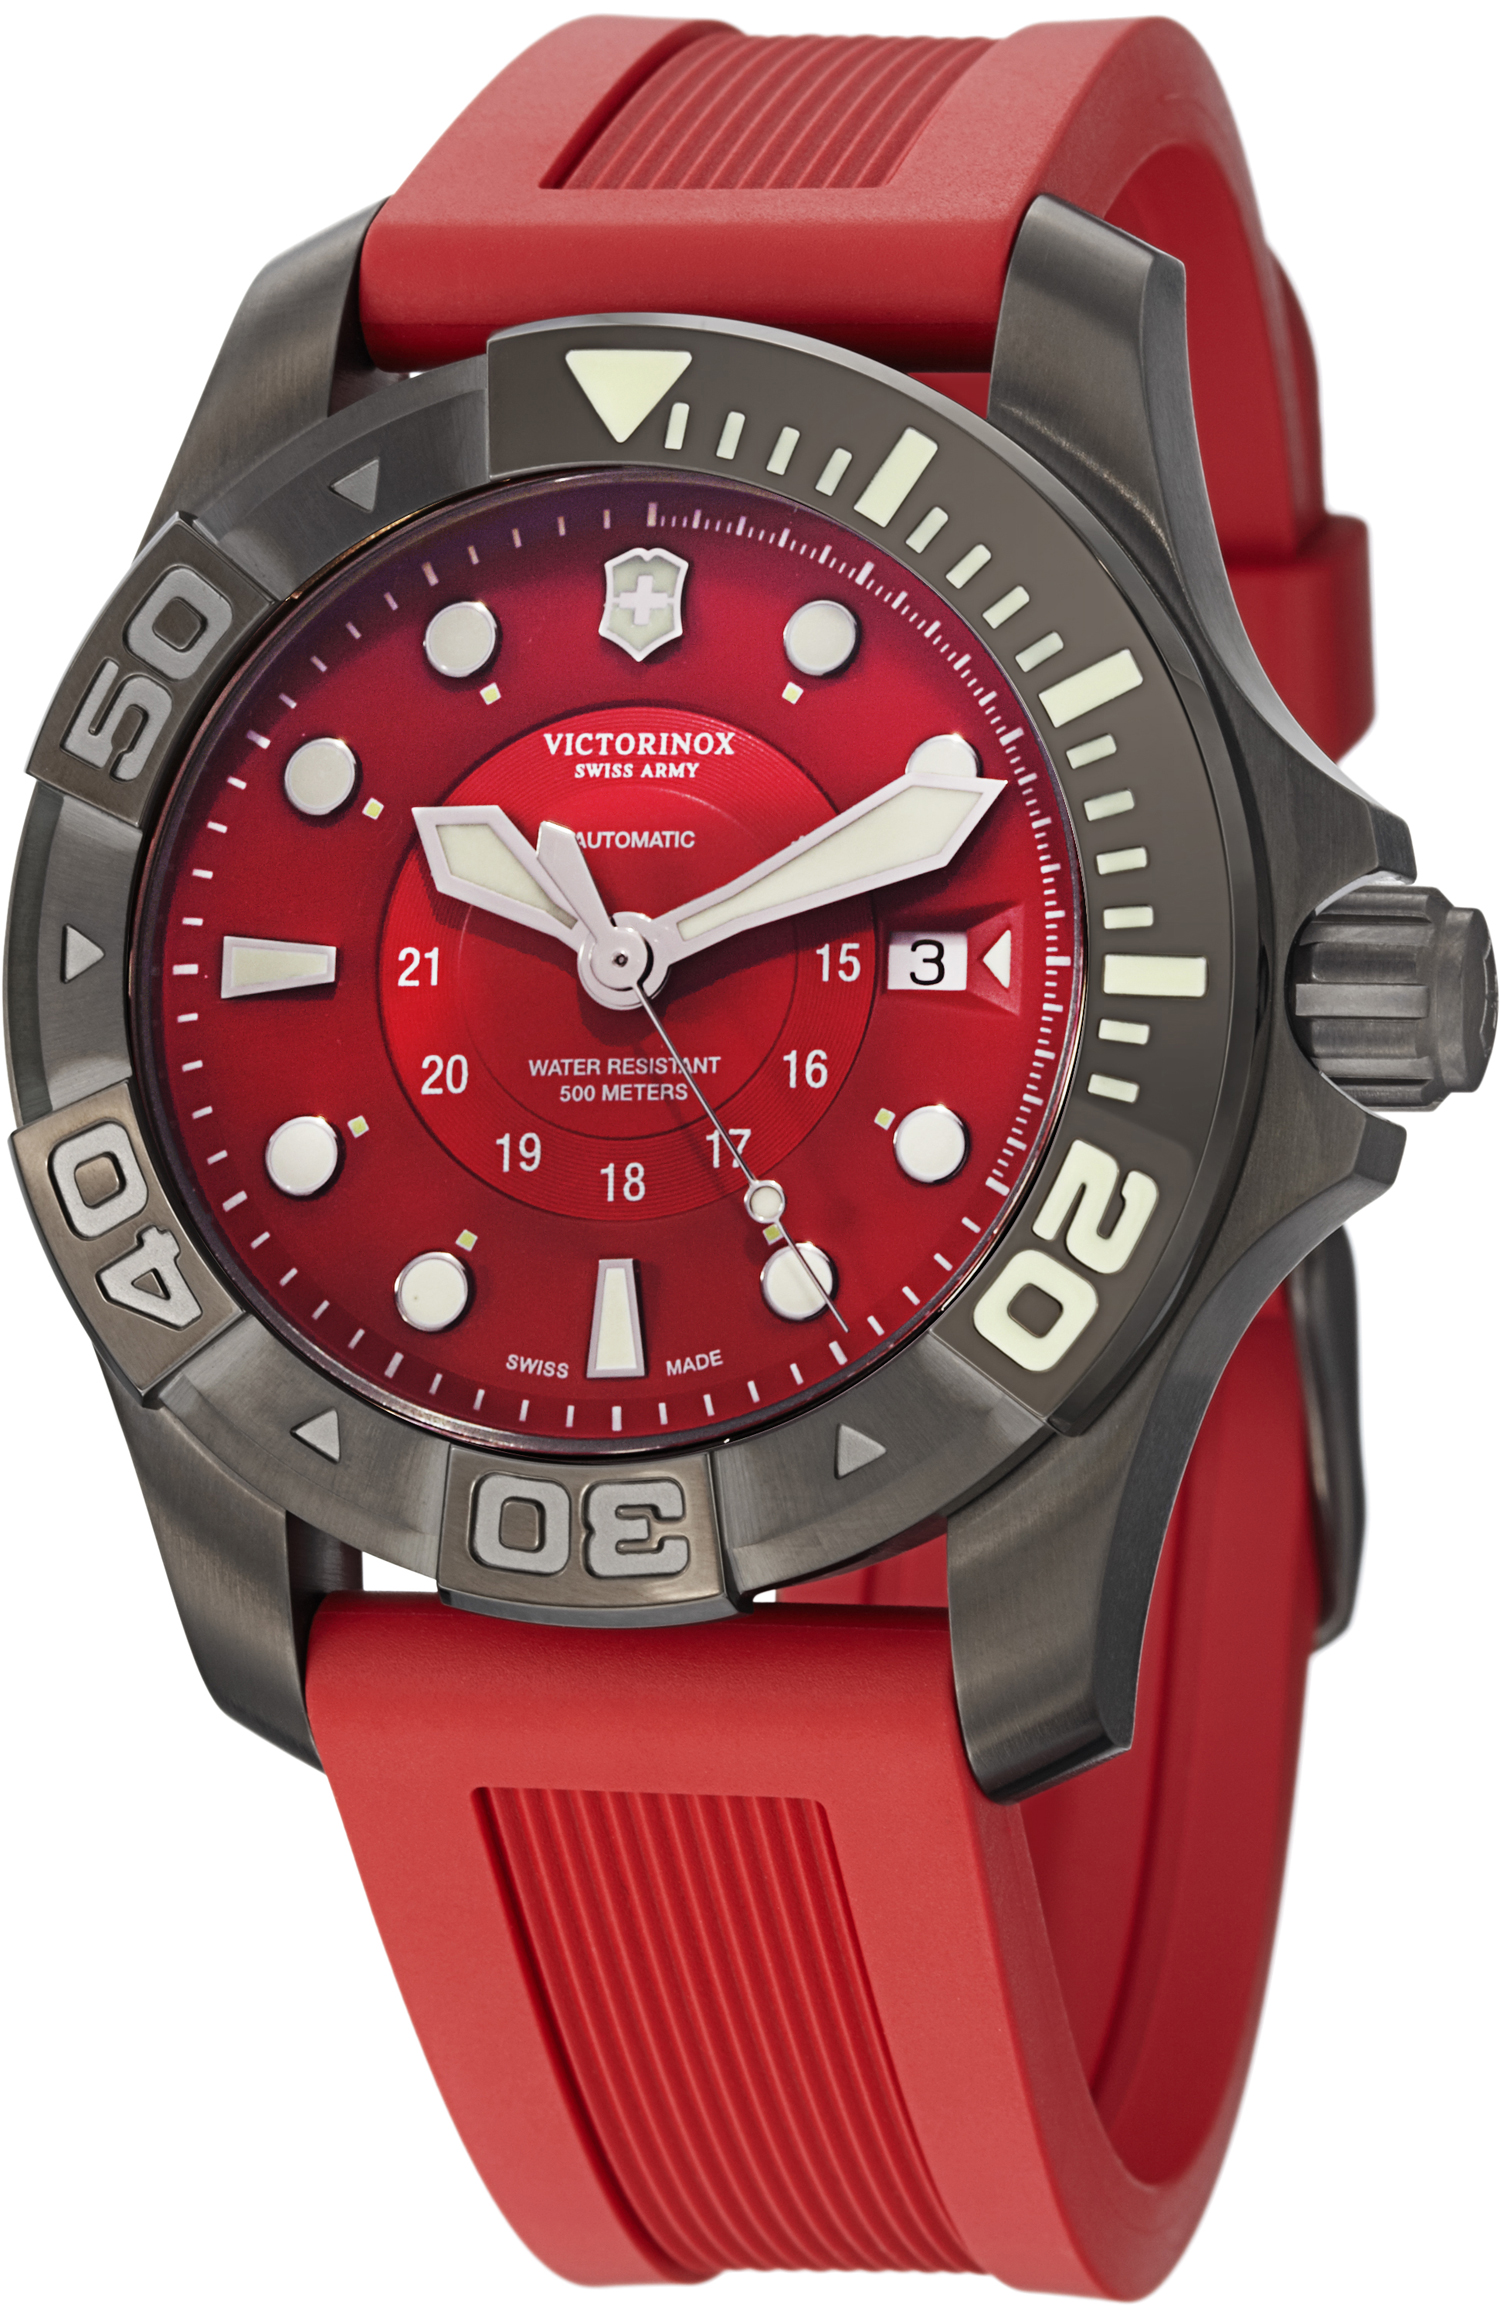 Swiss Army Diver Watch - Army Military